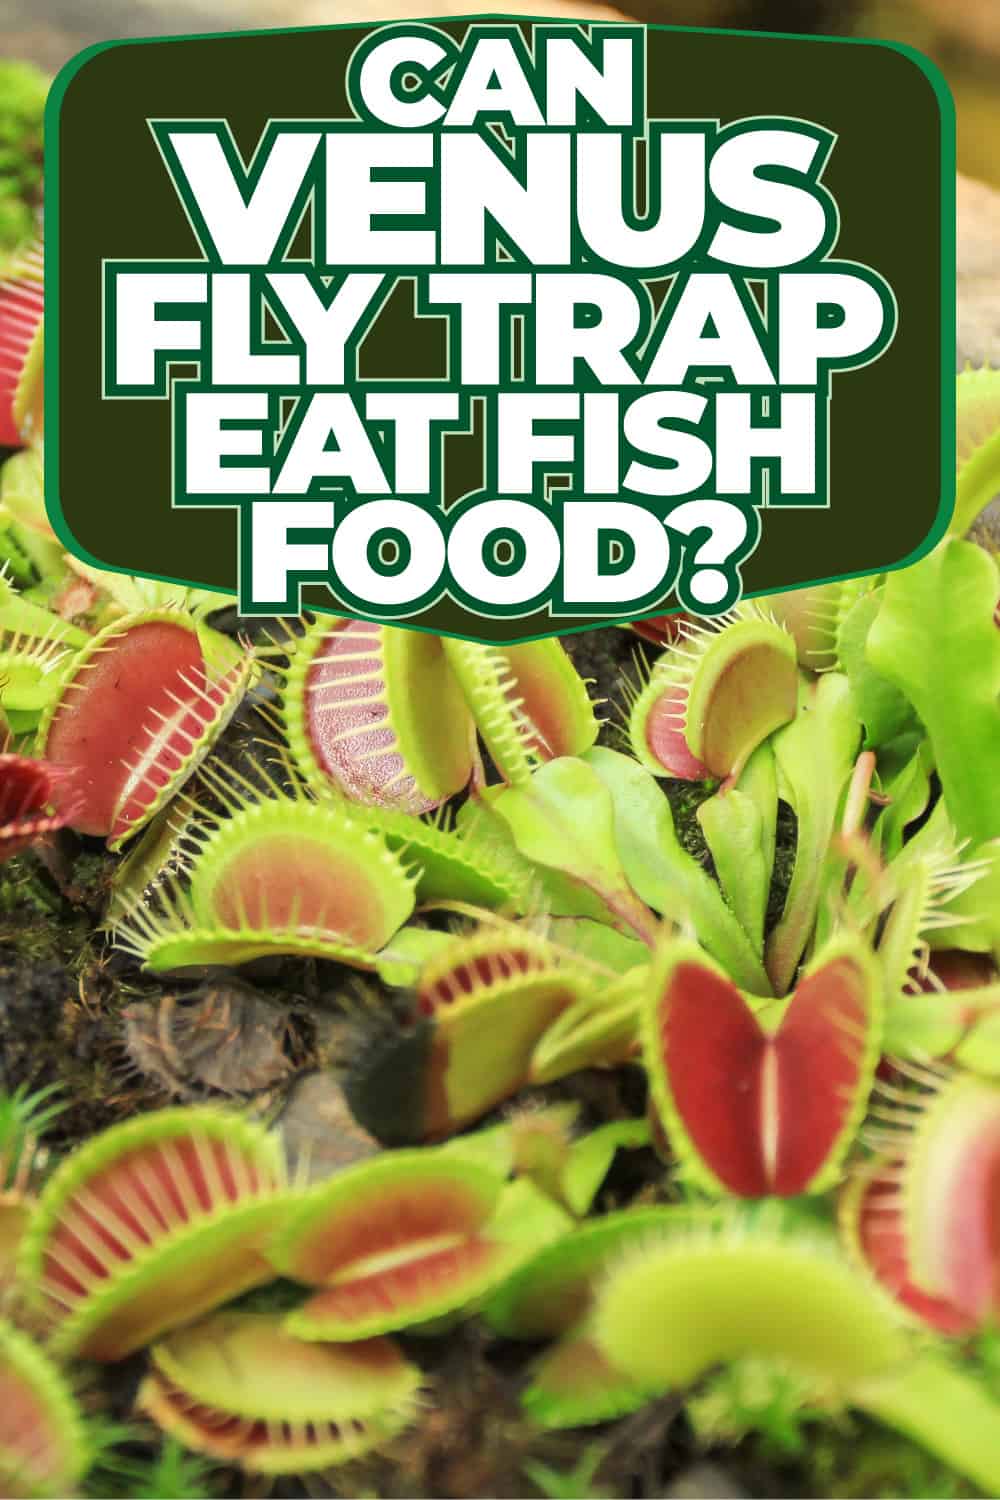 Can Venus Fly Traps Eat Fish Food?